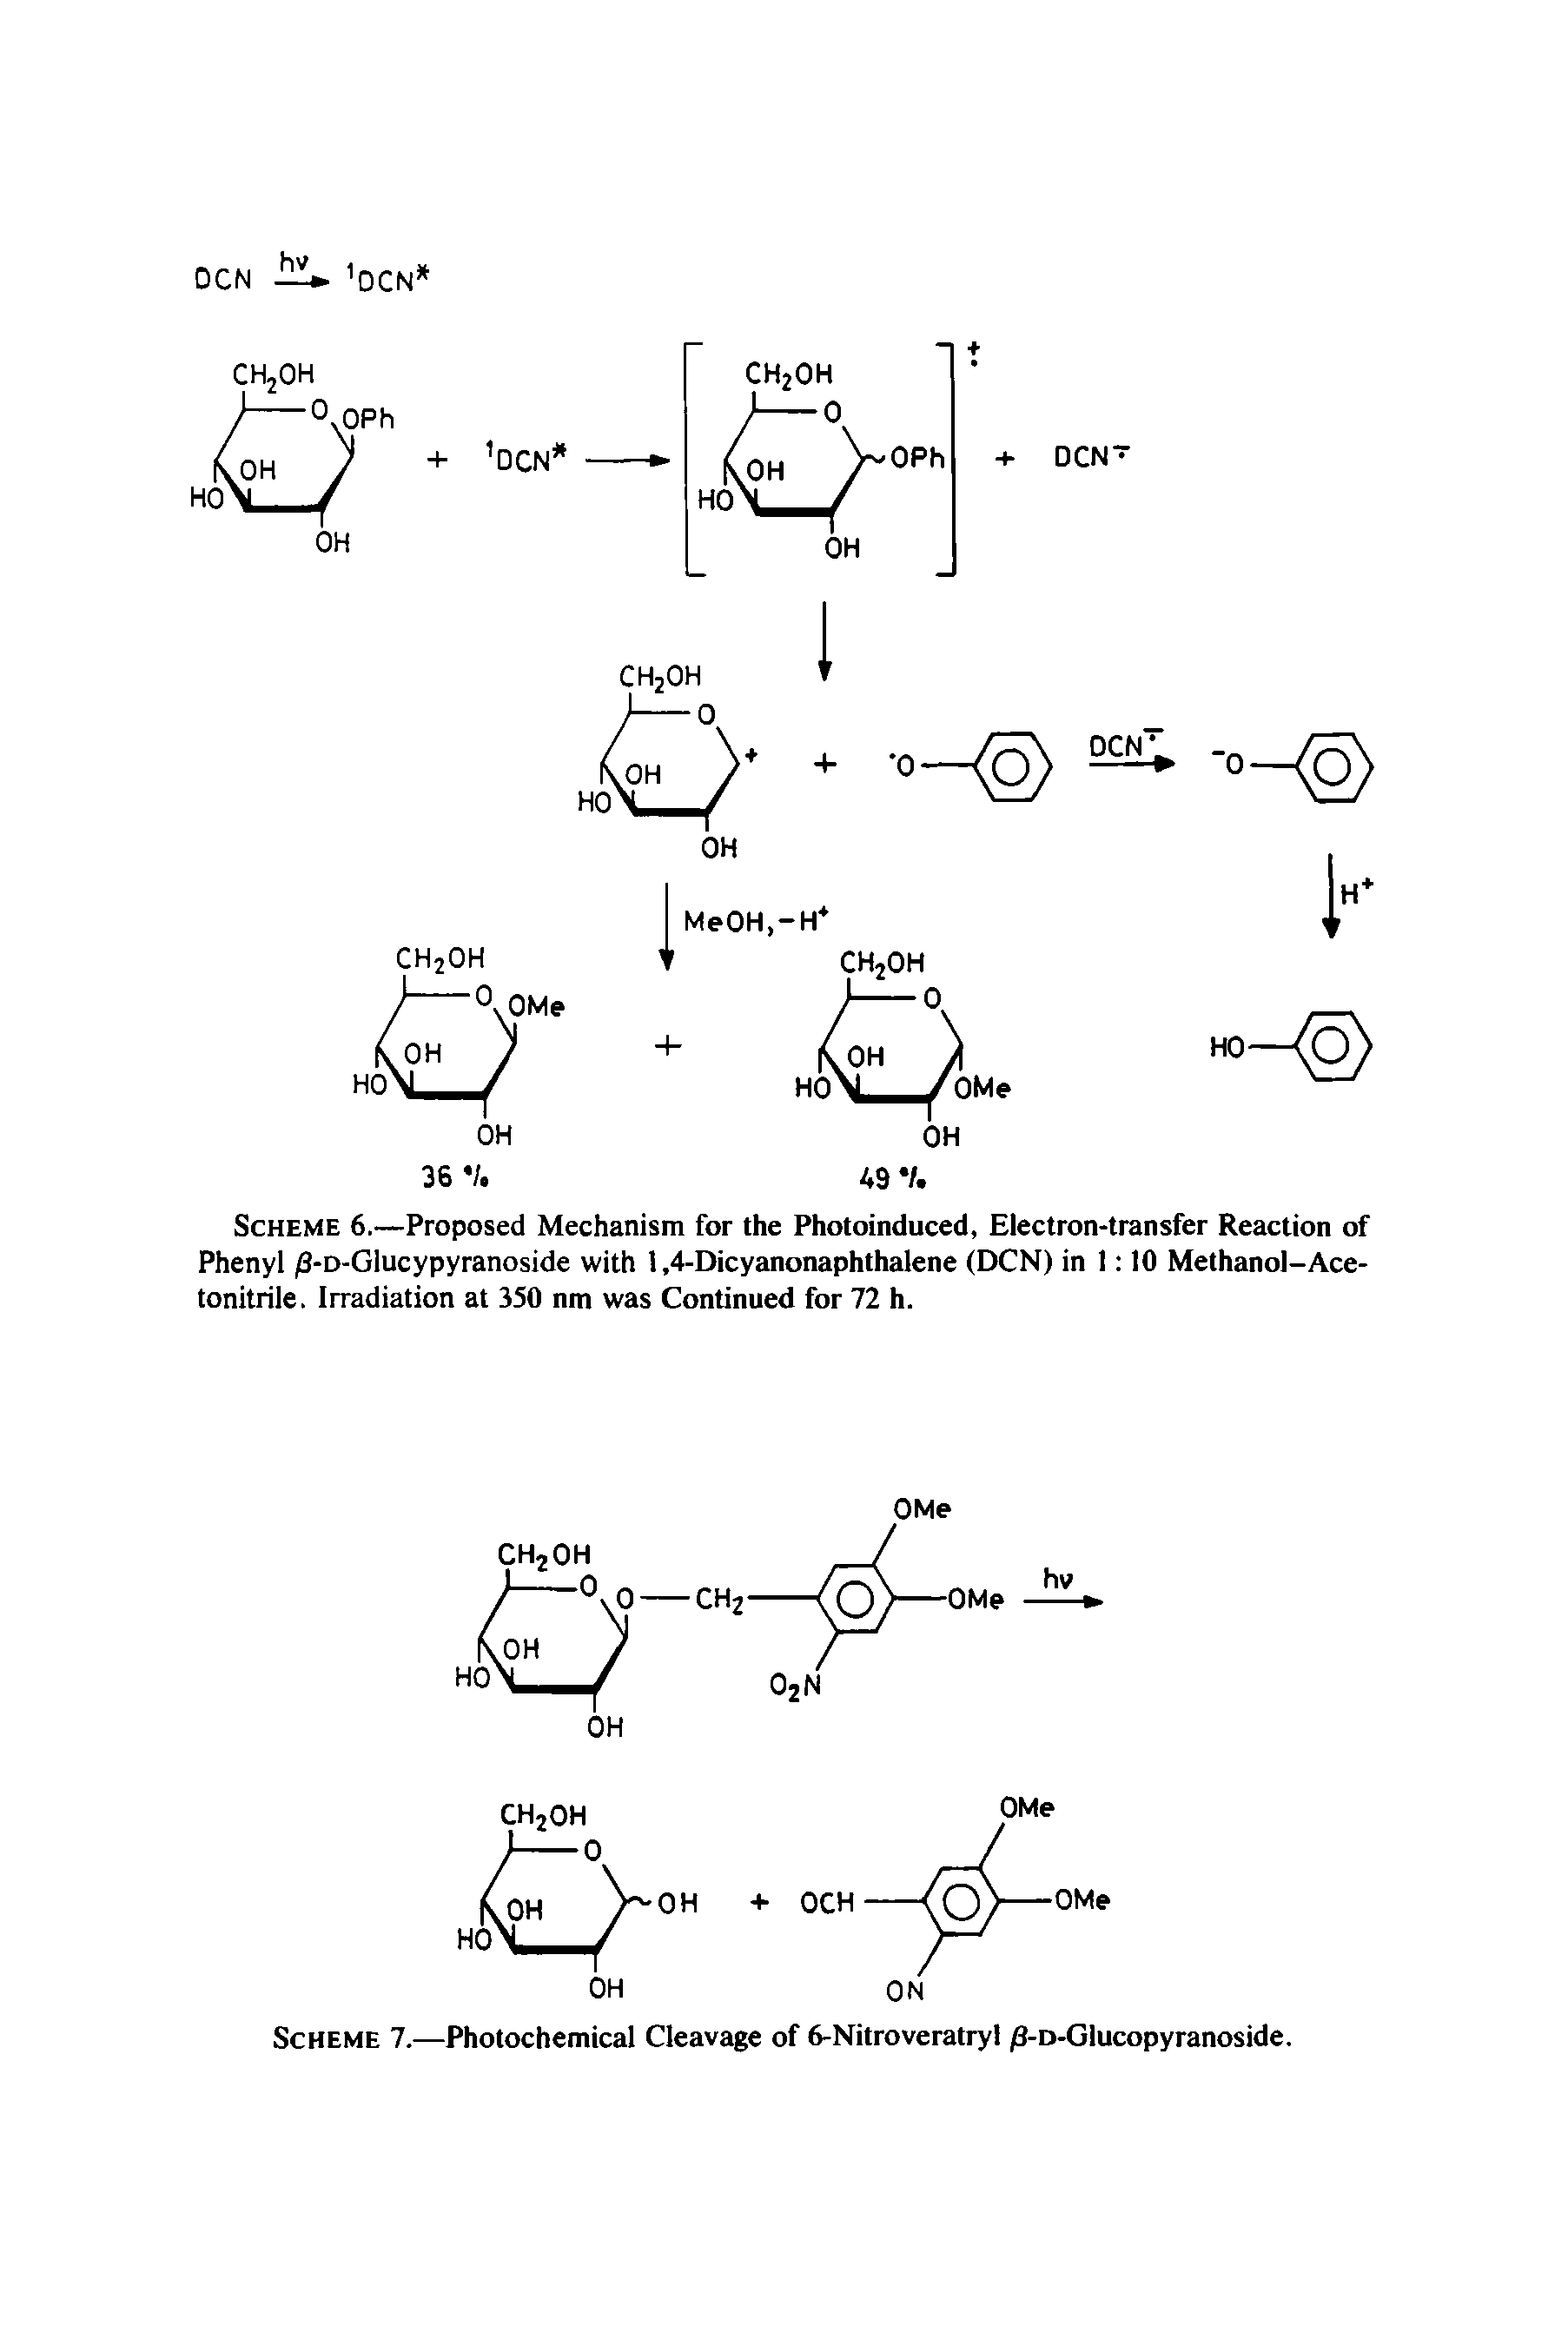 Scheme 6.—Proposed Mechanism for the Photoinduced, Electron-transfer Reaction of Phenyl /3-D-Glucypyranoside with 1,4-Dicyanonaphthalene (DCN) in 1 10 Methanol-Acetonitrile. Irradiation at 350 nm was Continued for 72 h.